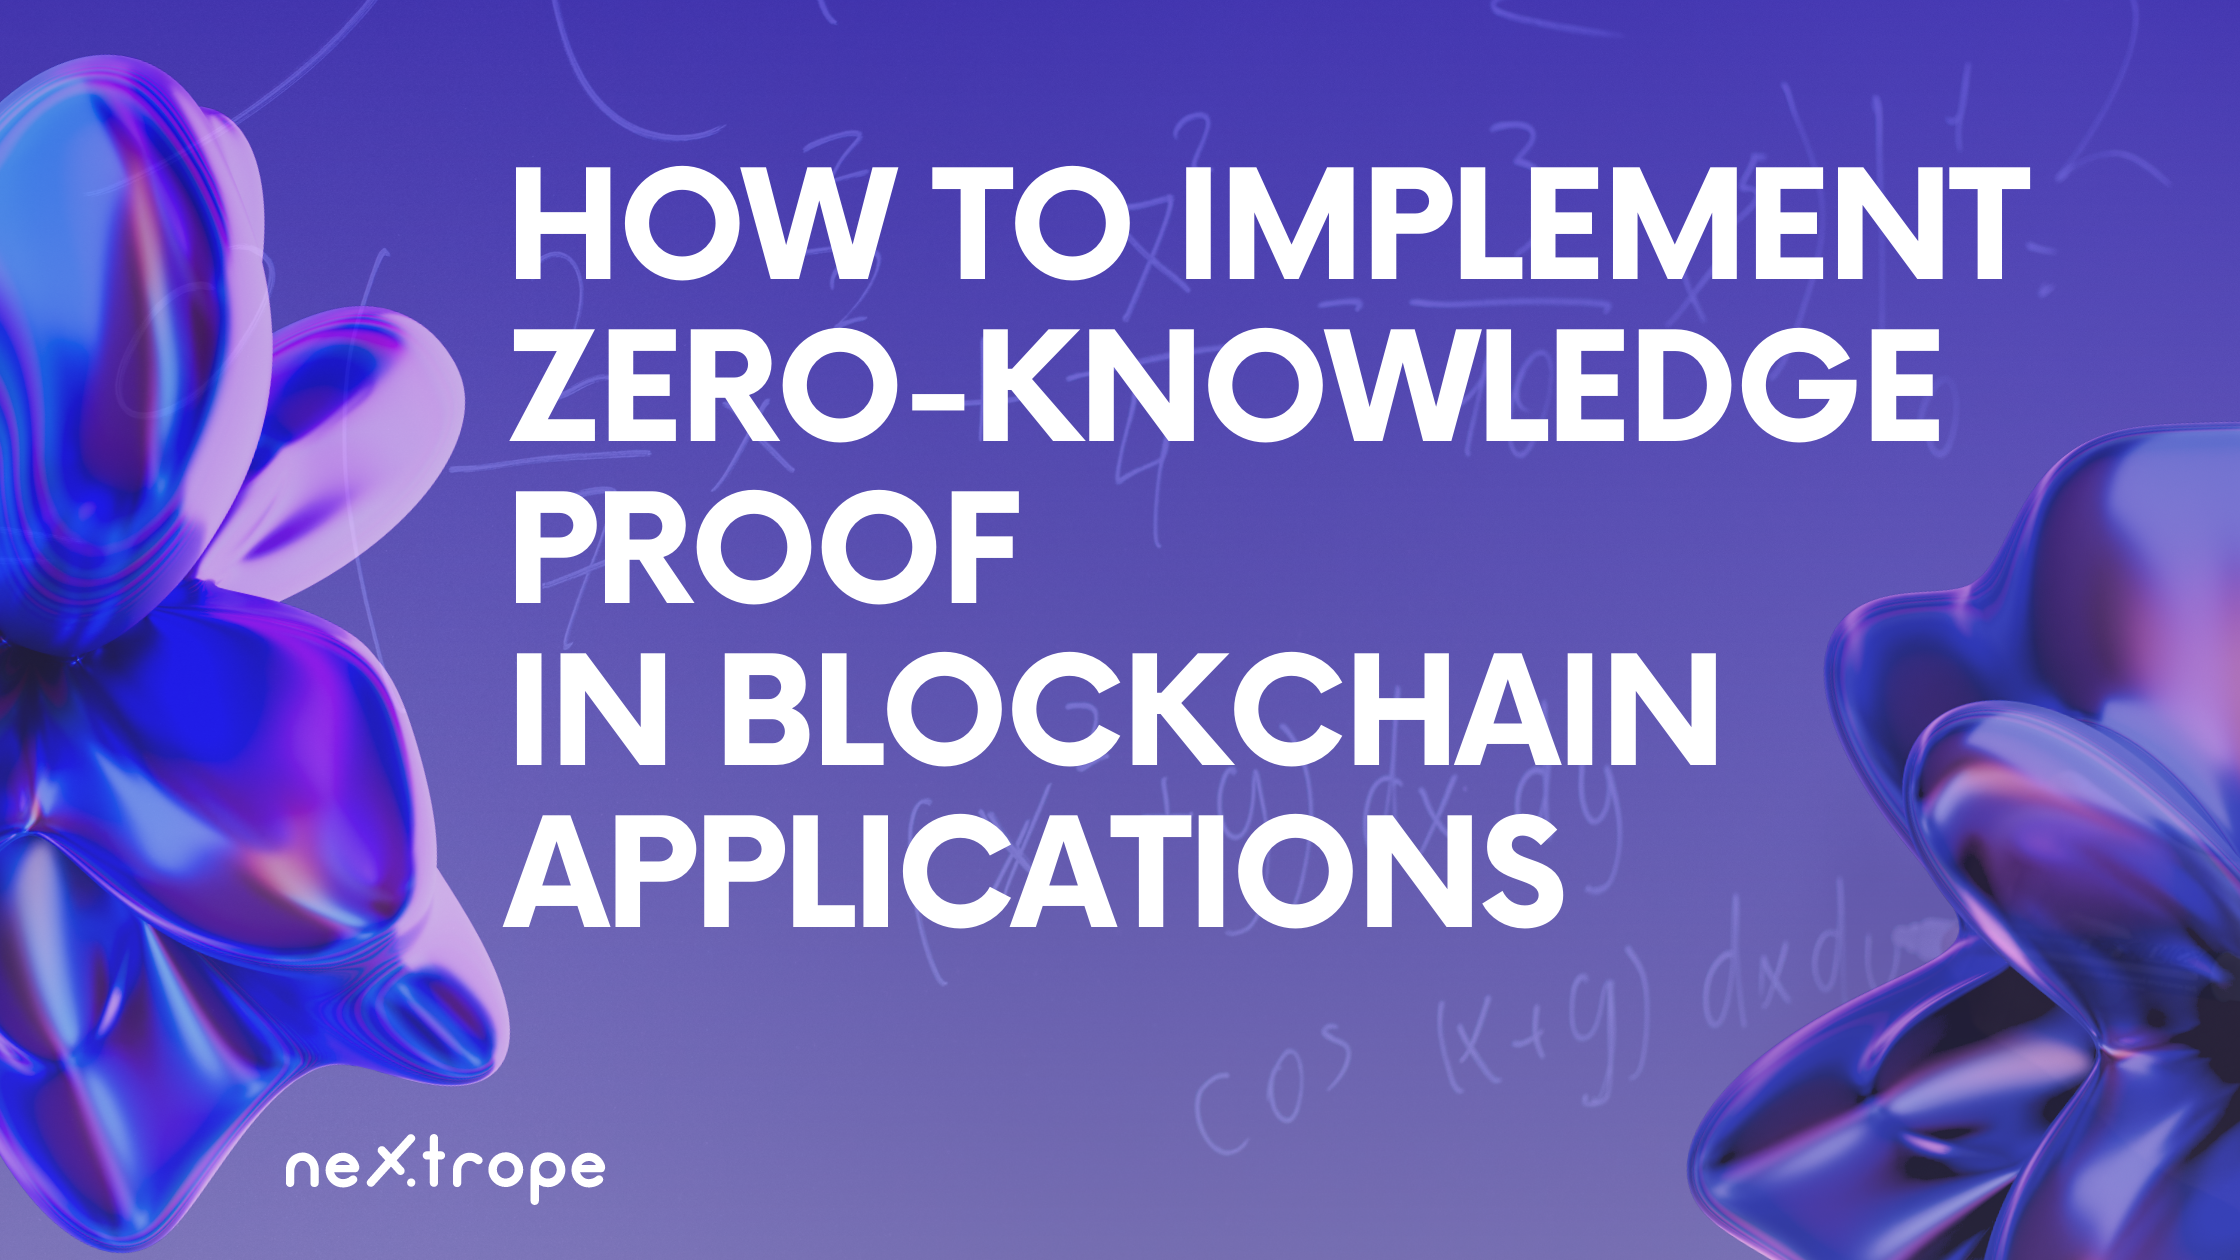 How to Implement Zero-Knowledge Proof in Blockchain Applications